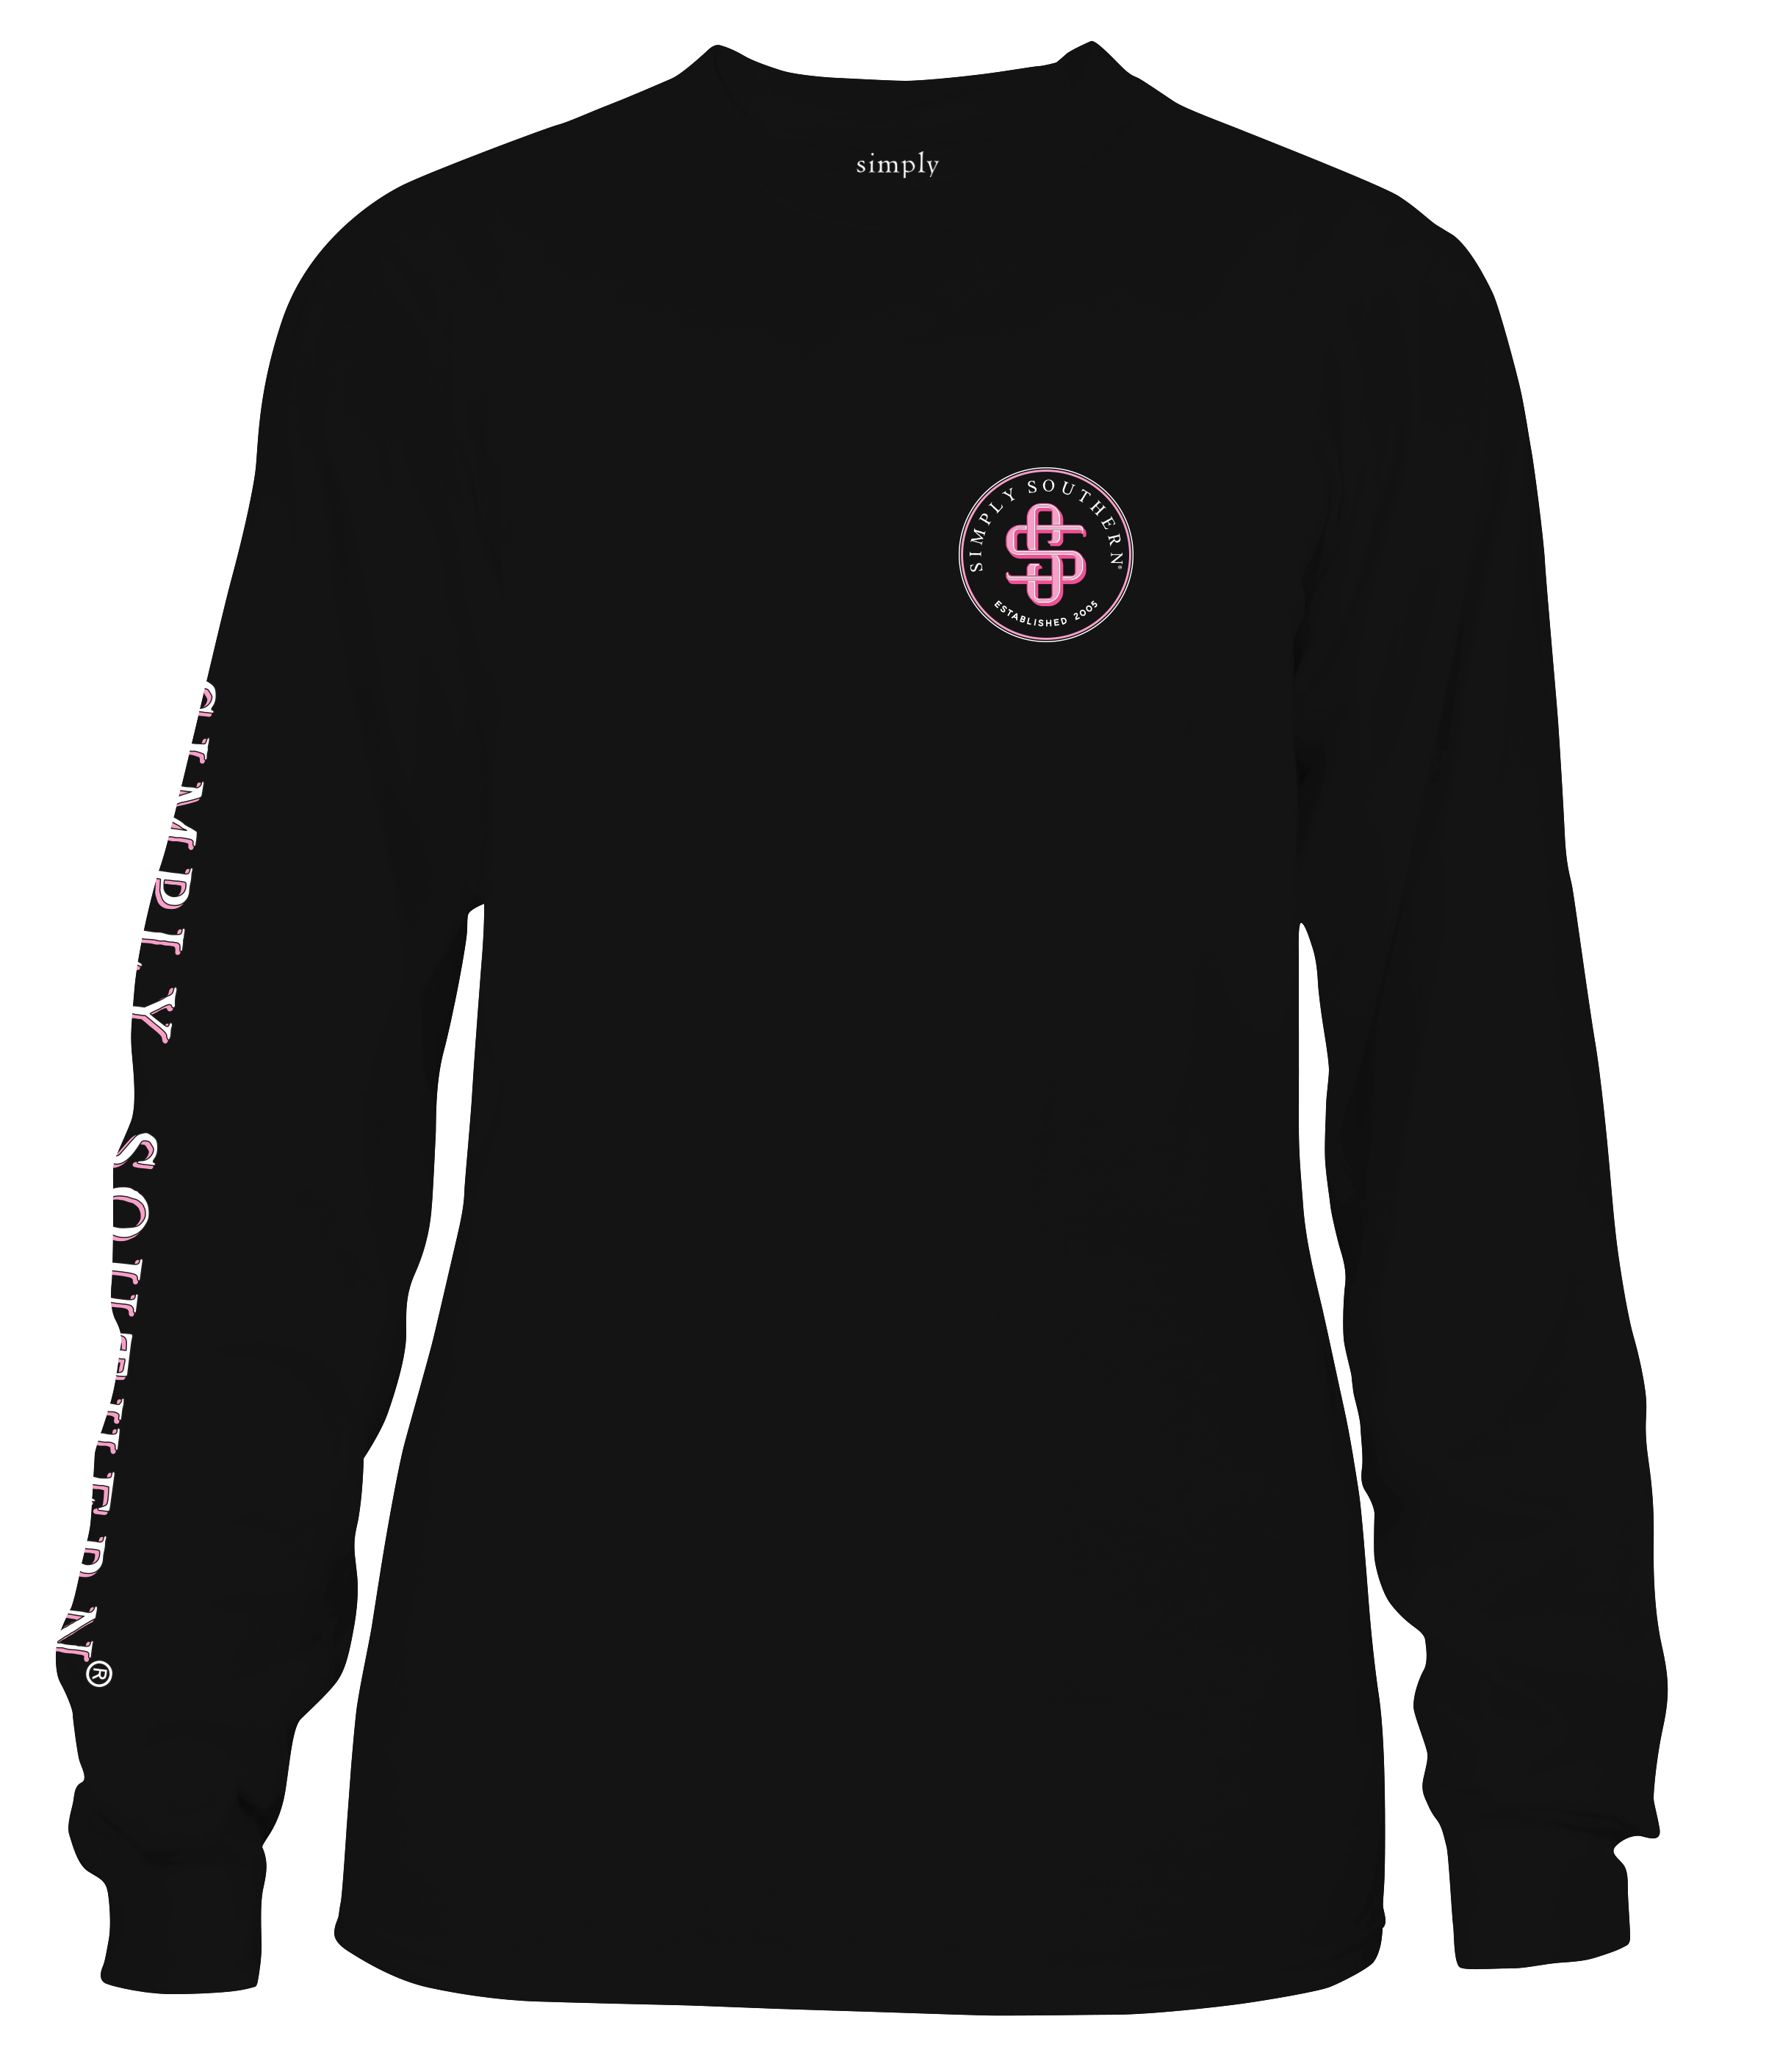 'Strength, Courage, and Support' Breast Cancer Long Sleeve Tee by Simply Southern